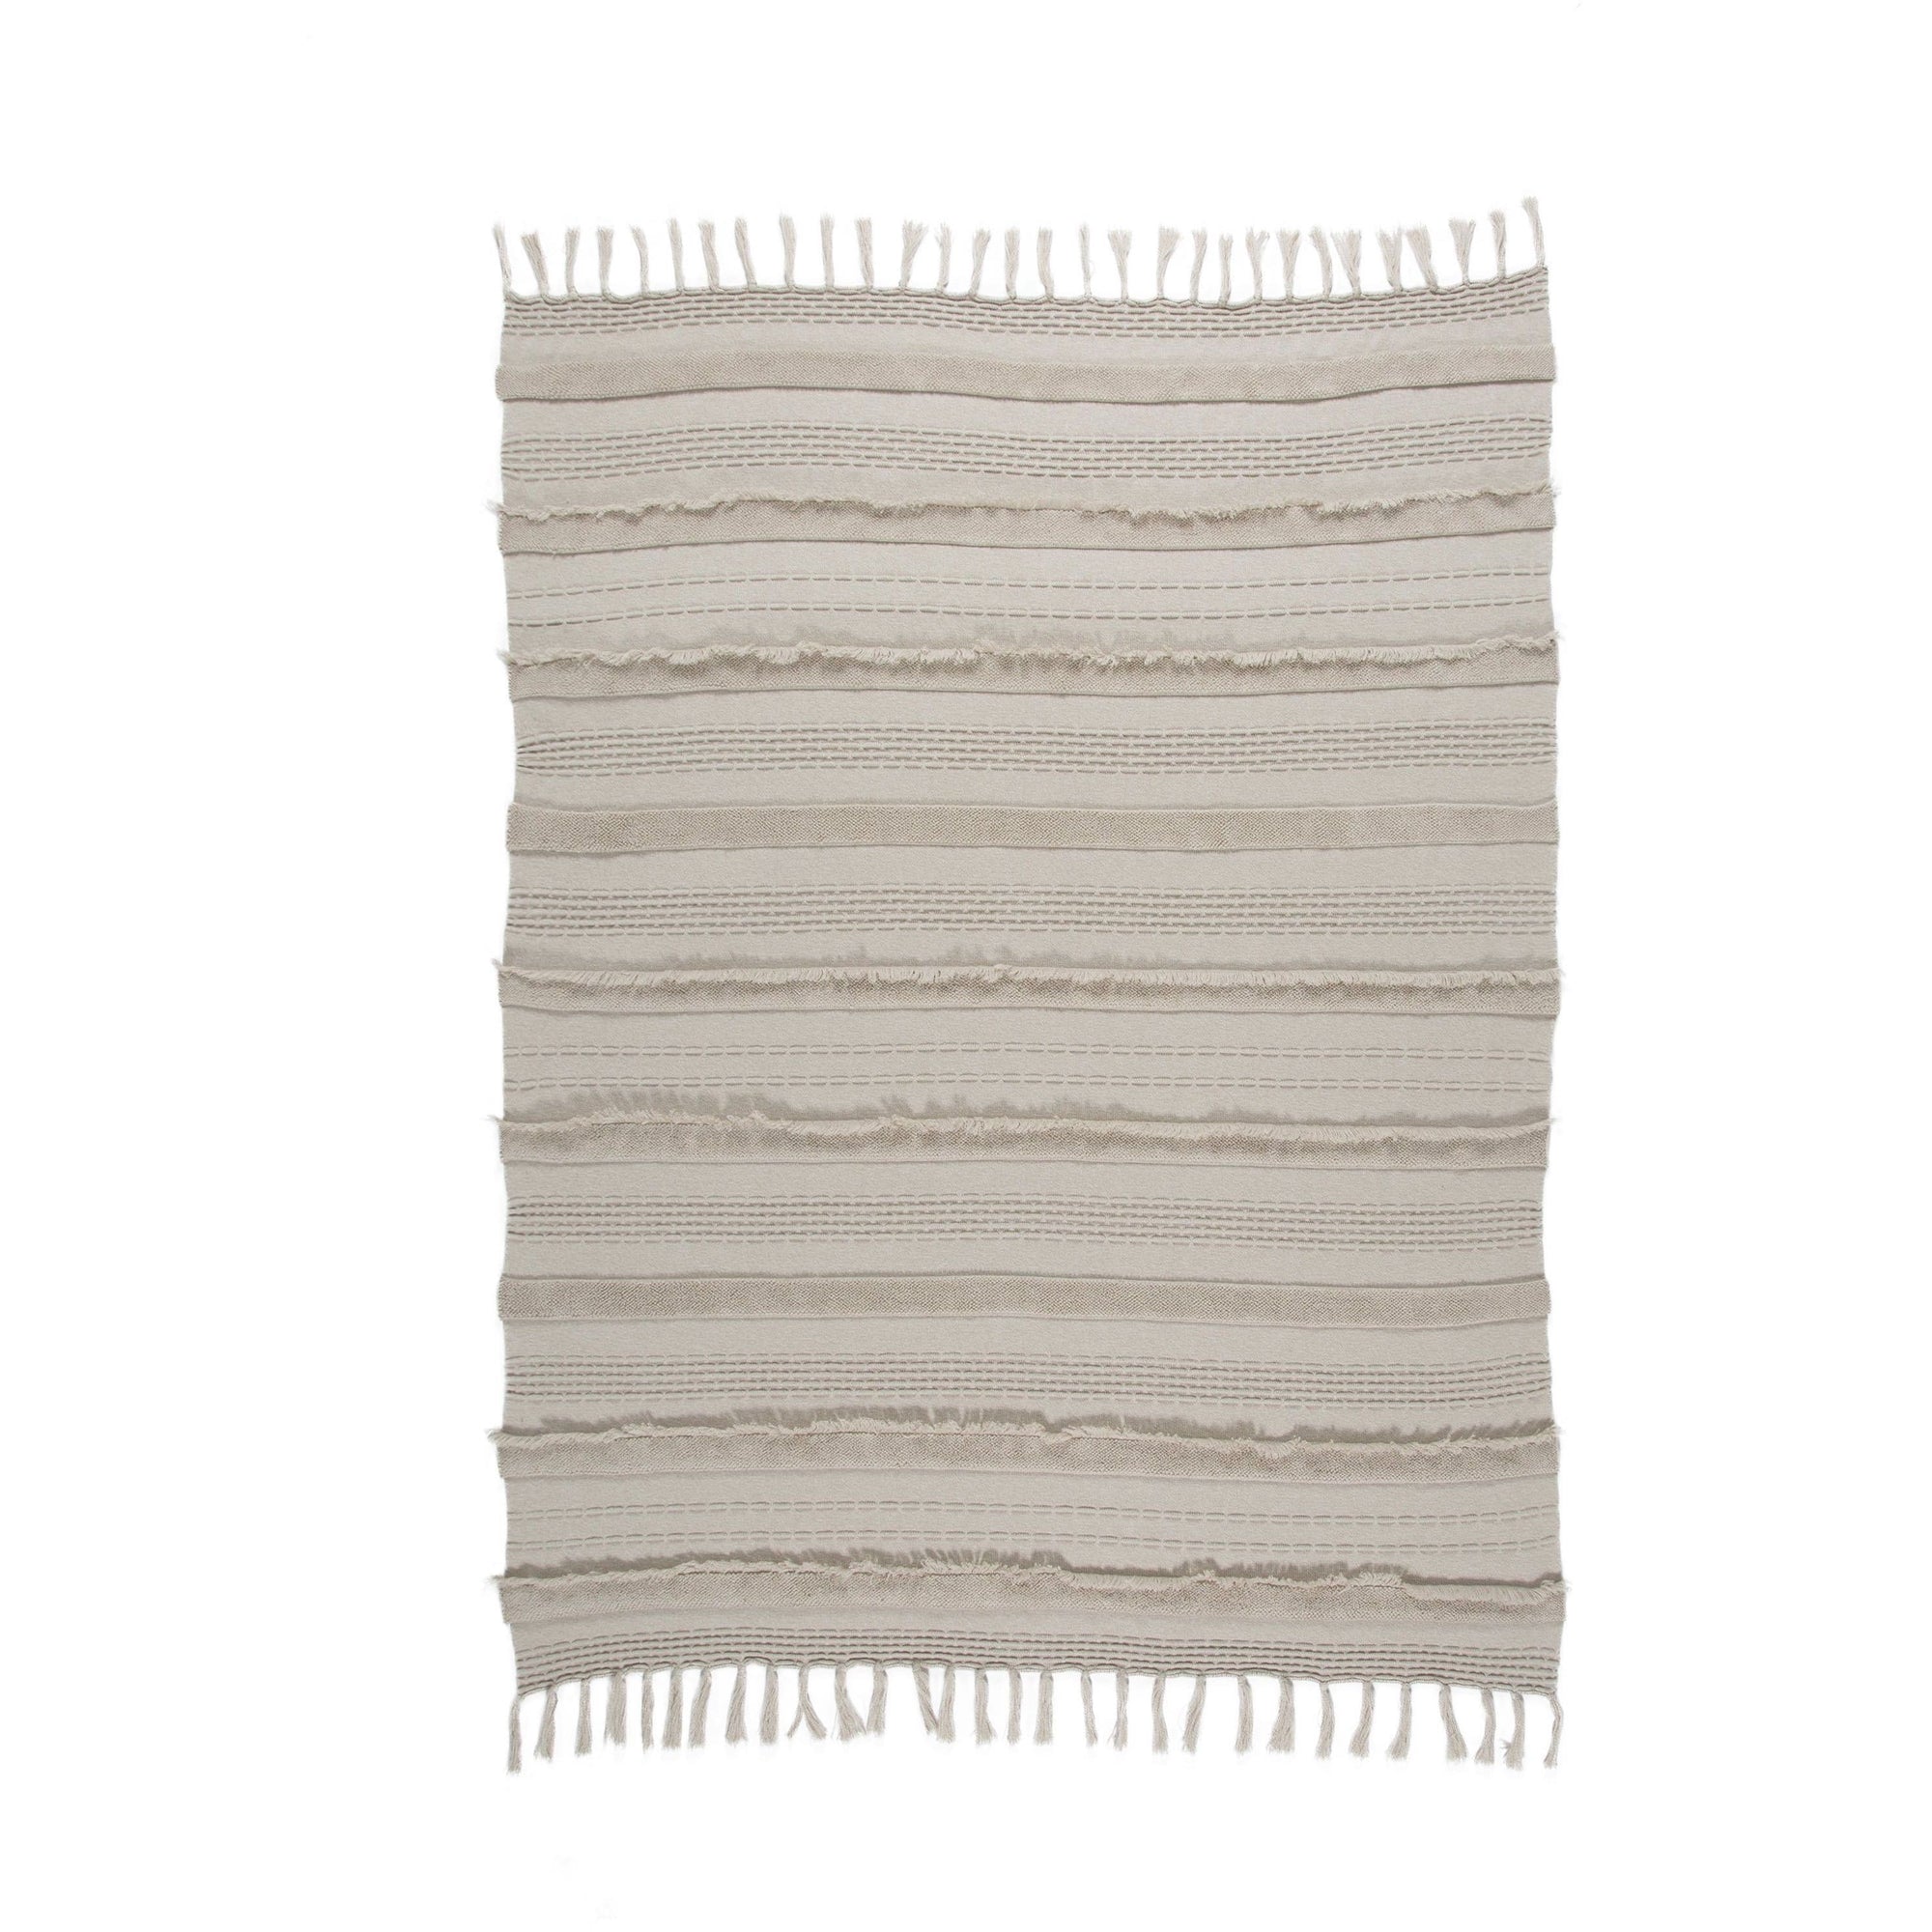 Lorena Canals Air Dune White Knitted Blanket